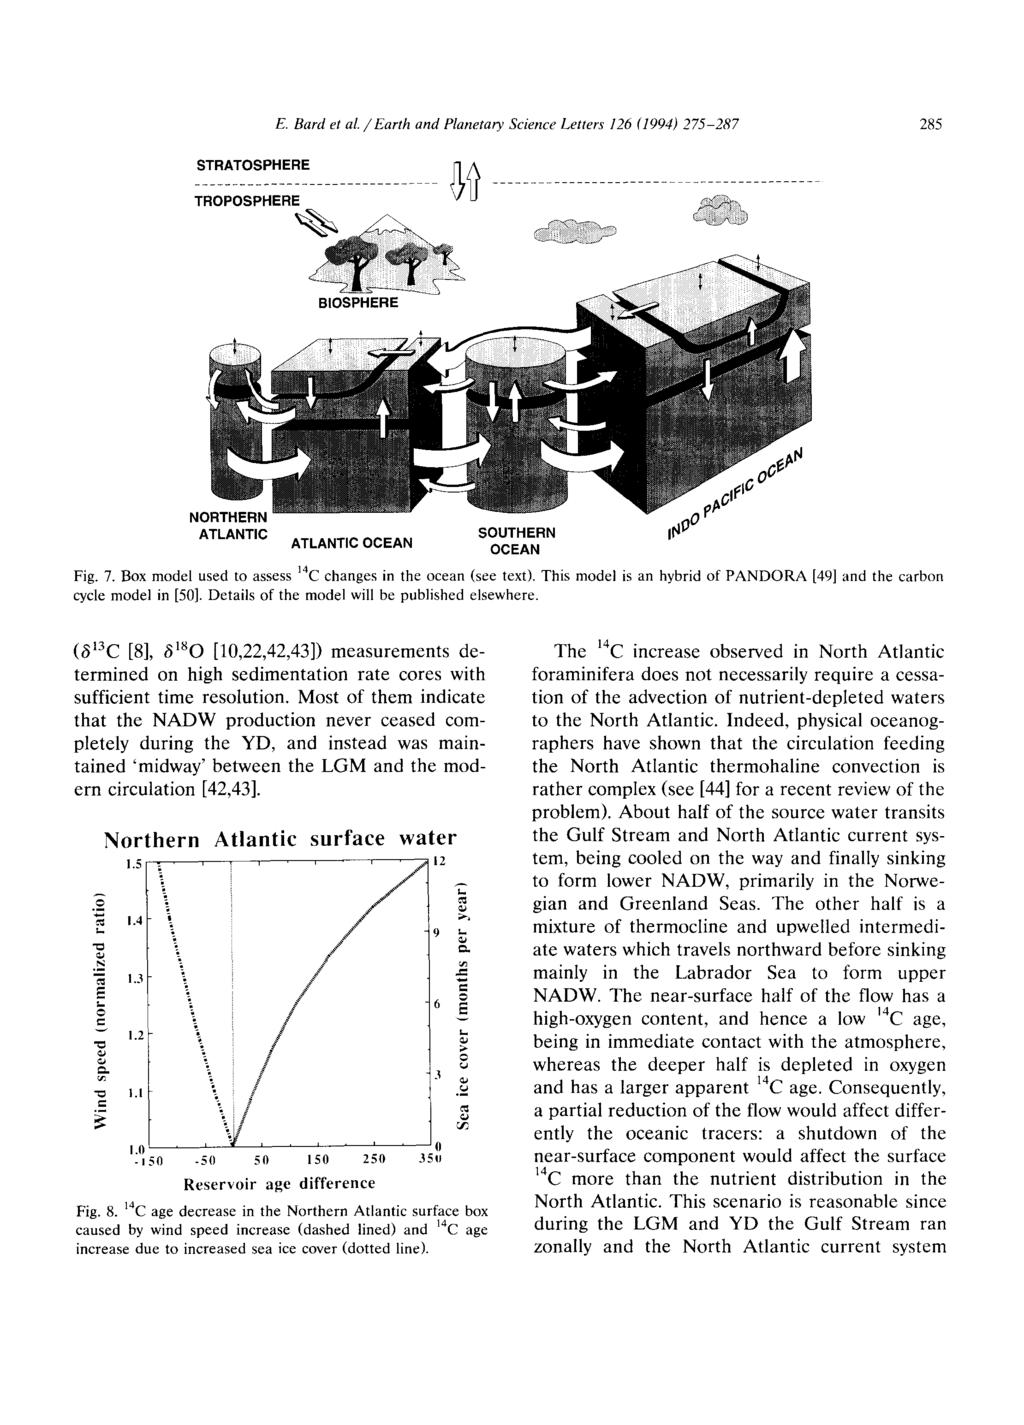 E Bard et al./earth and Planetary Science Letters 126 (1994) 275-287 285 TROPOSPHERE na V[J... N( / A I L,o.N I =t,, u~,-~r~ OCEAN Fig. 7. Box model used to assess 14C changes in the ocean (see text).